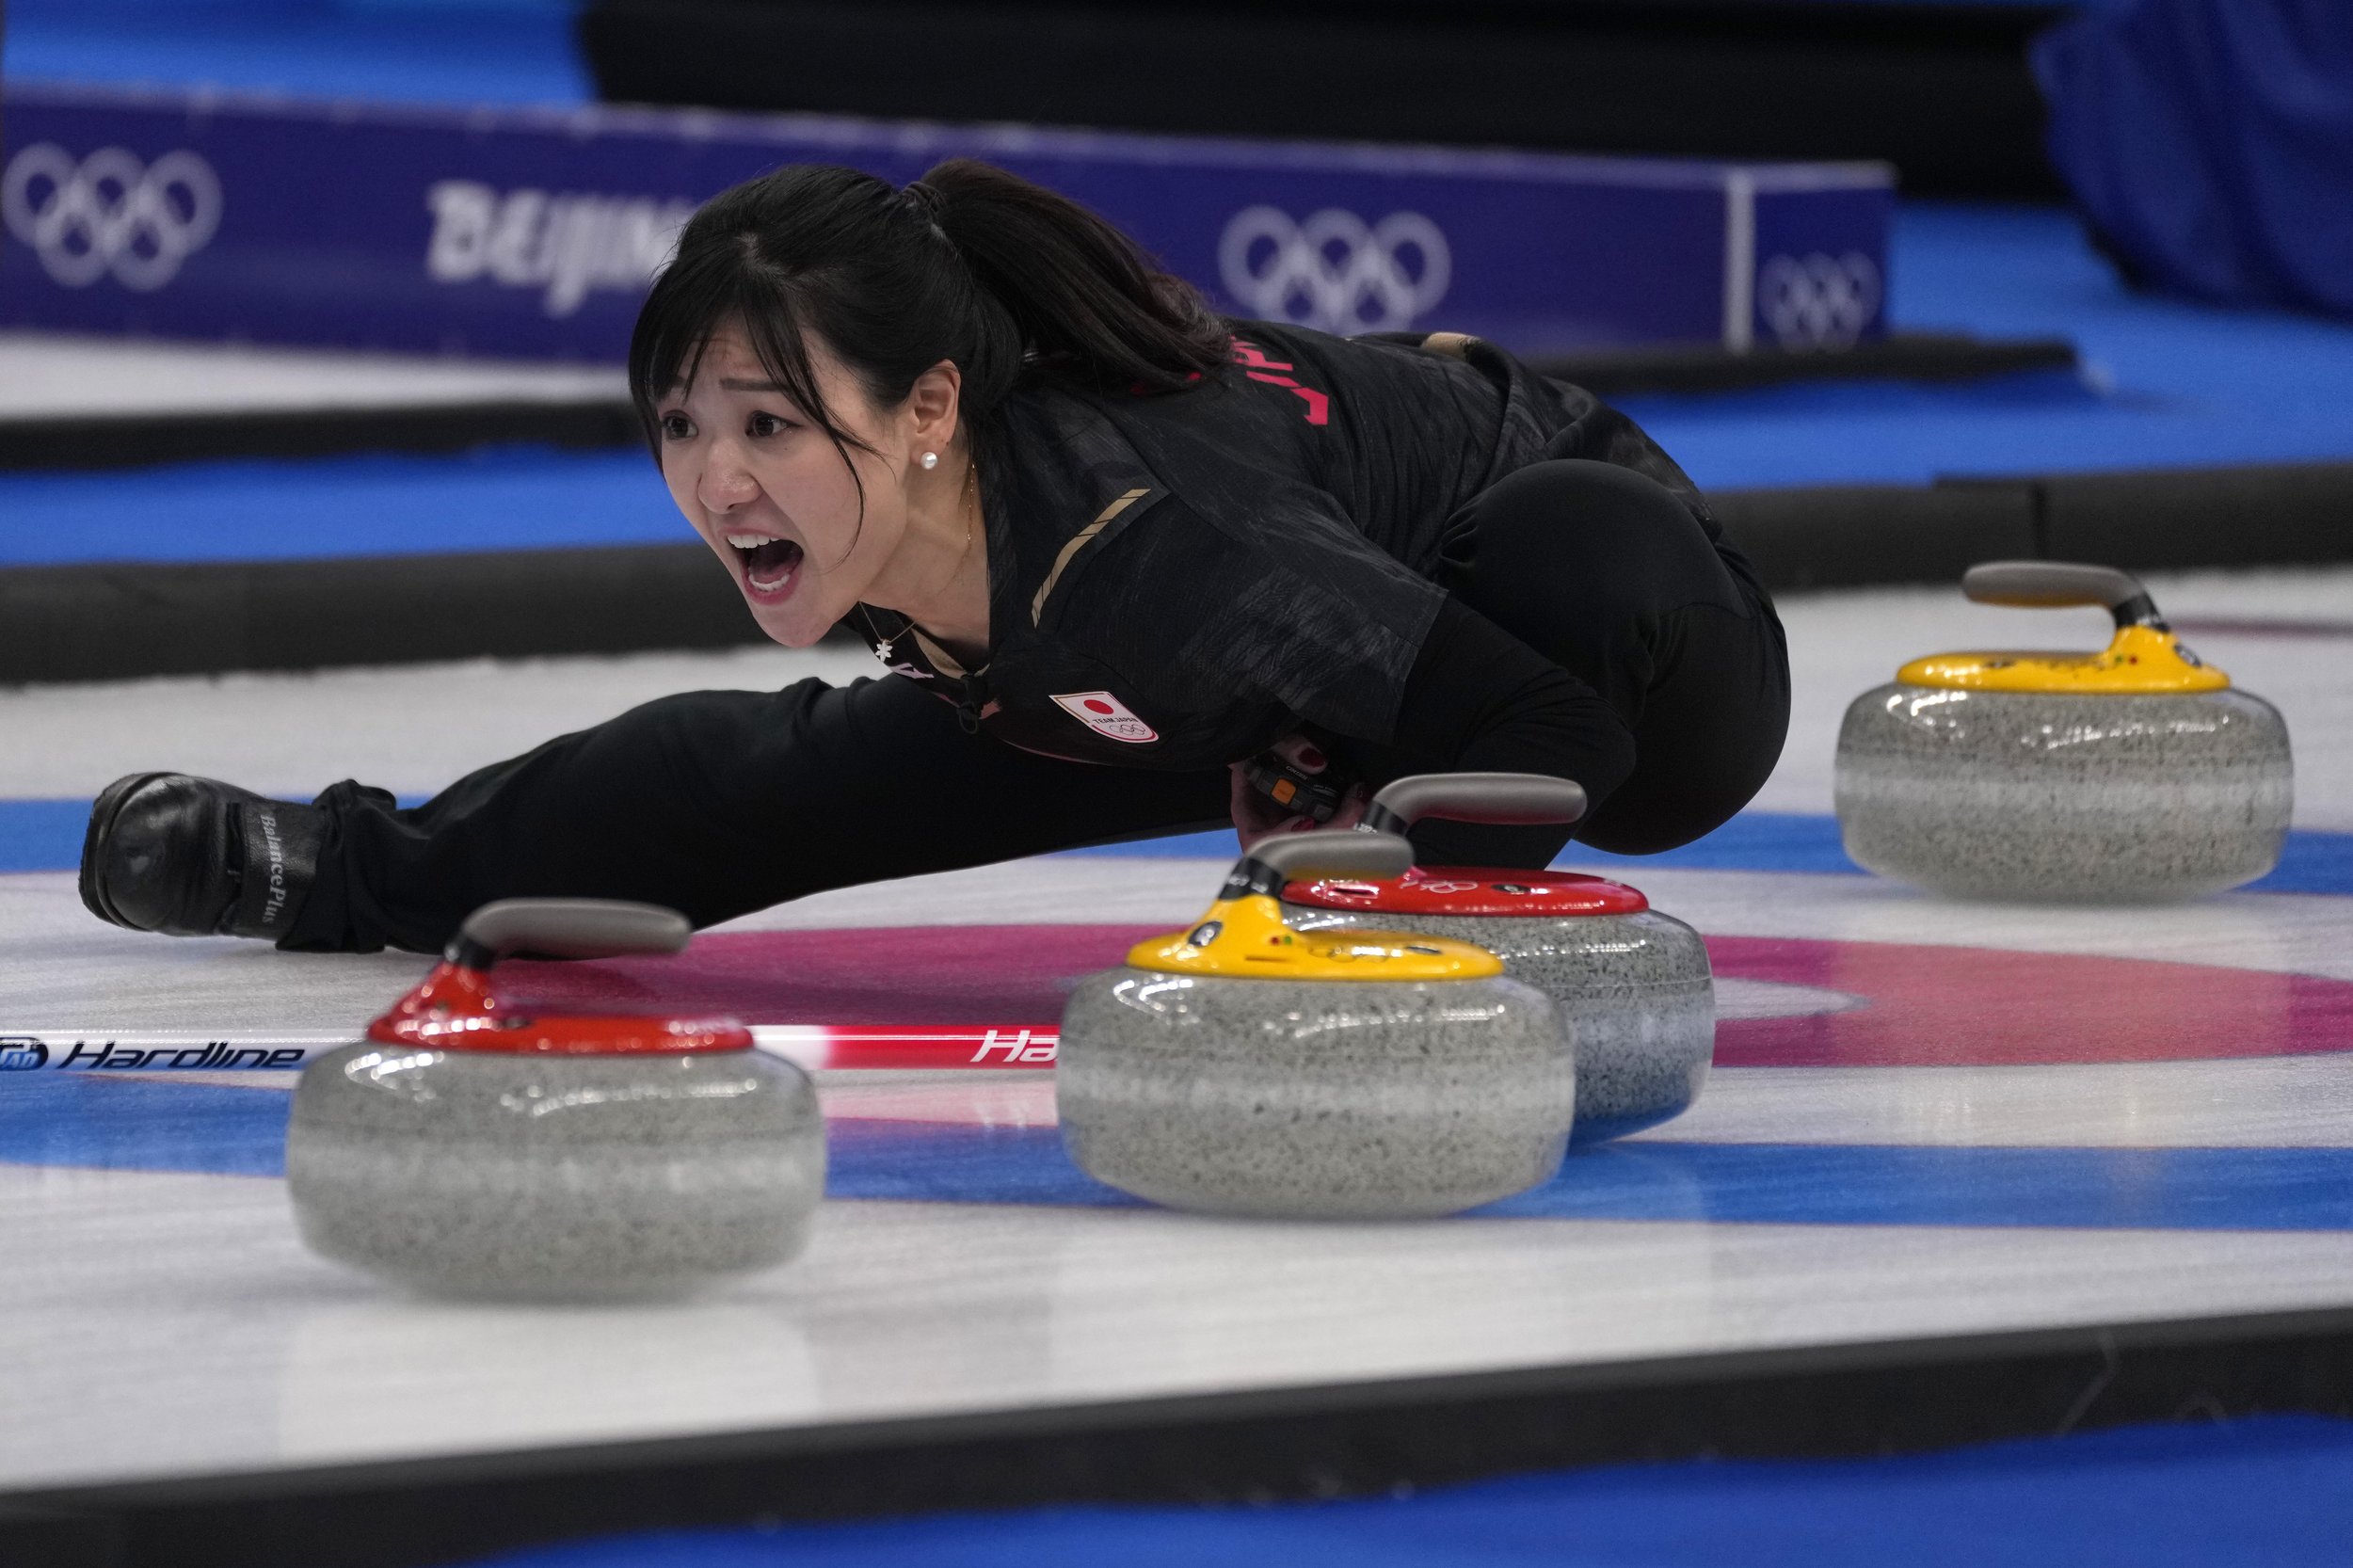  Japan's Chinami Yoshida shouts instructions to teammates during a women's curling semifinal match between Japan and Switzerland at the Beijing Winter Olympics Friday, Feb. 18, 2022, in Beijing. (AP Photo/Nariman El-Mofty) 